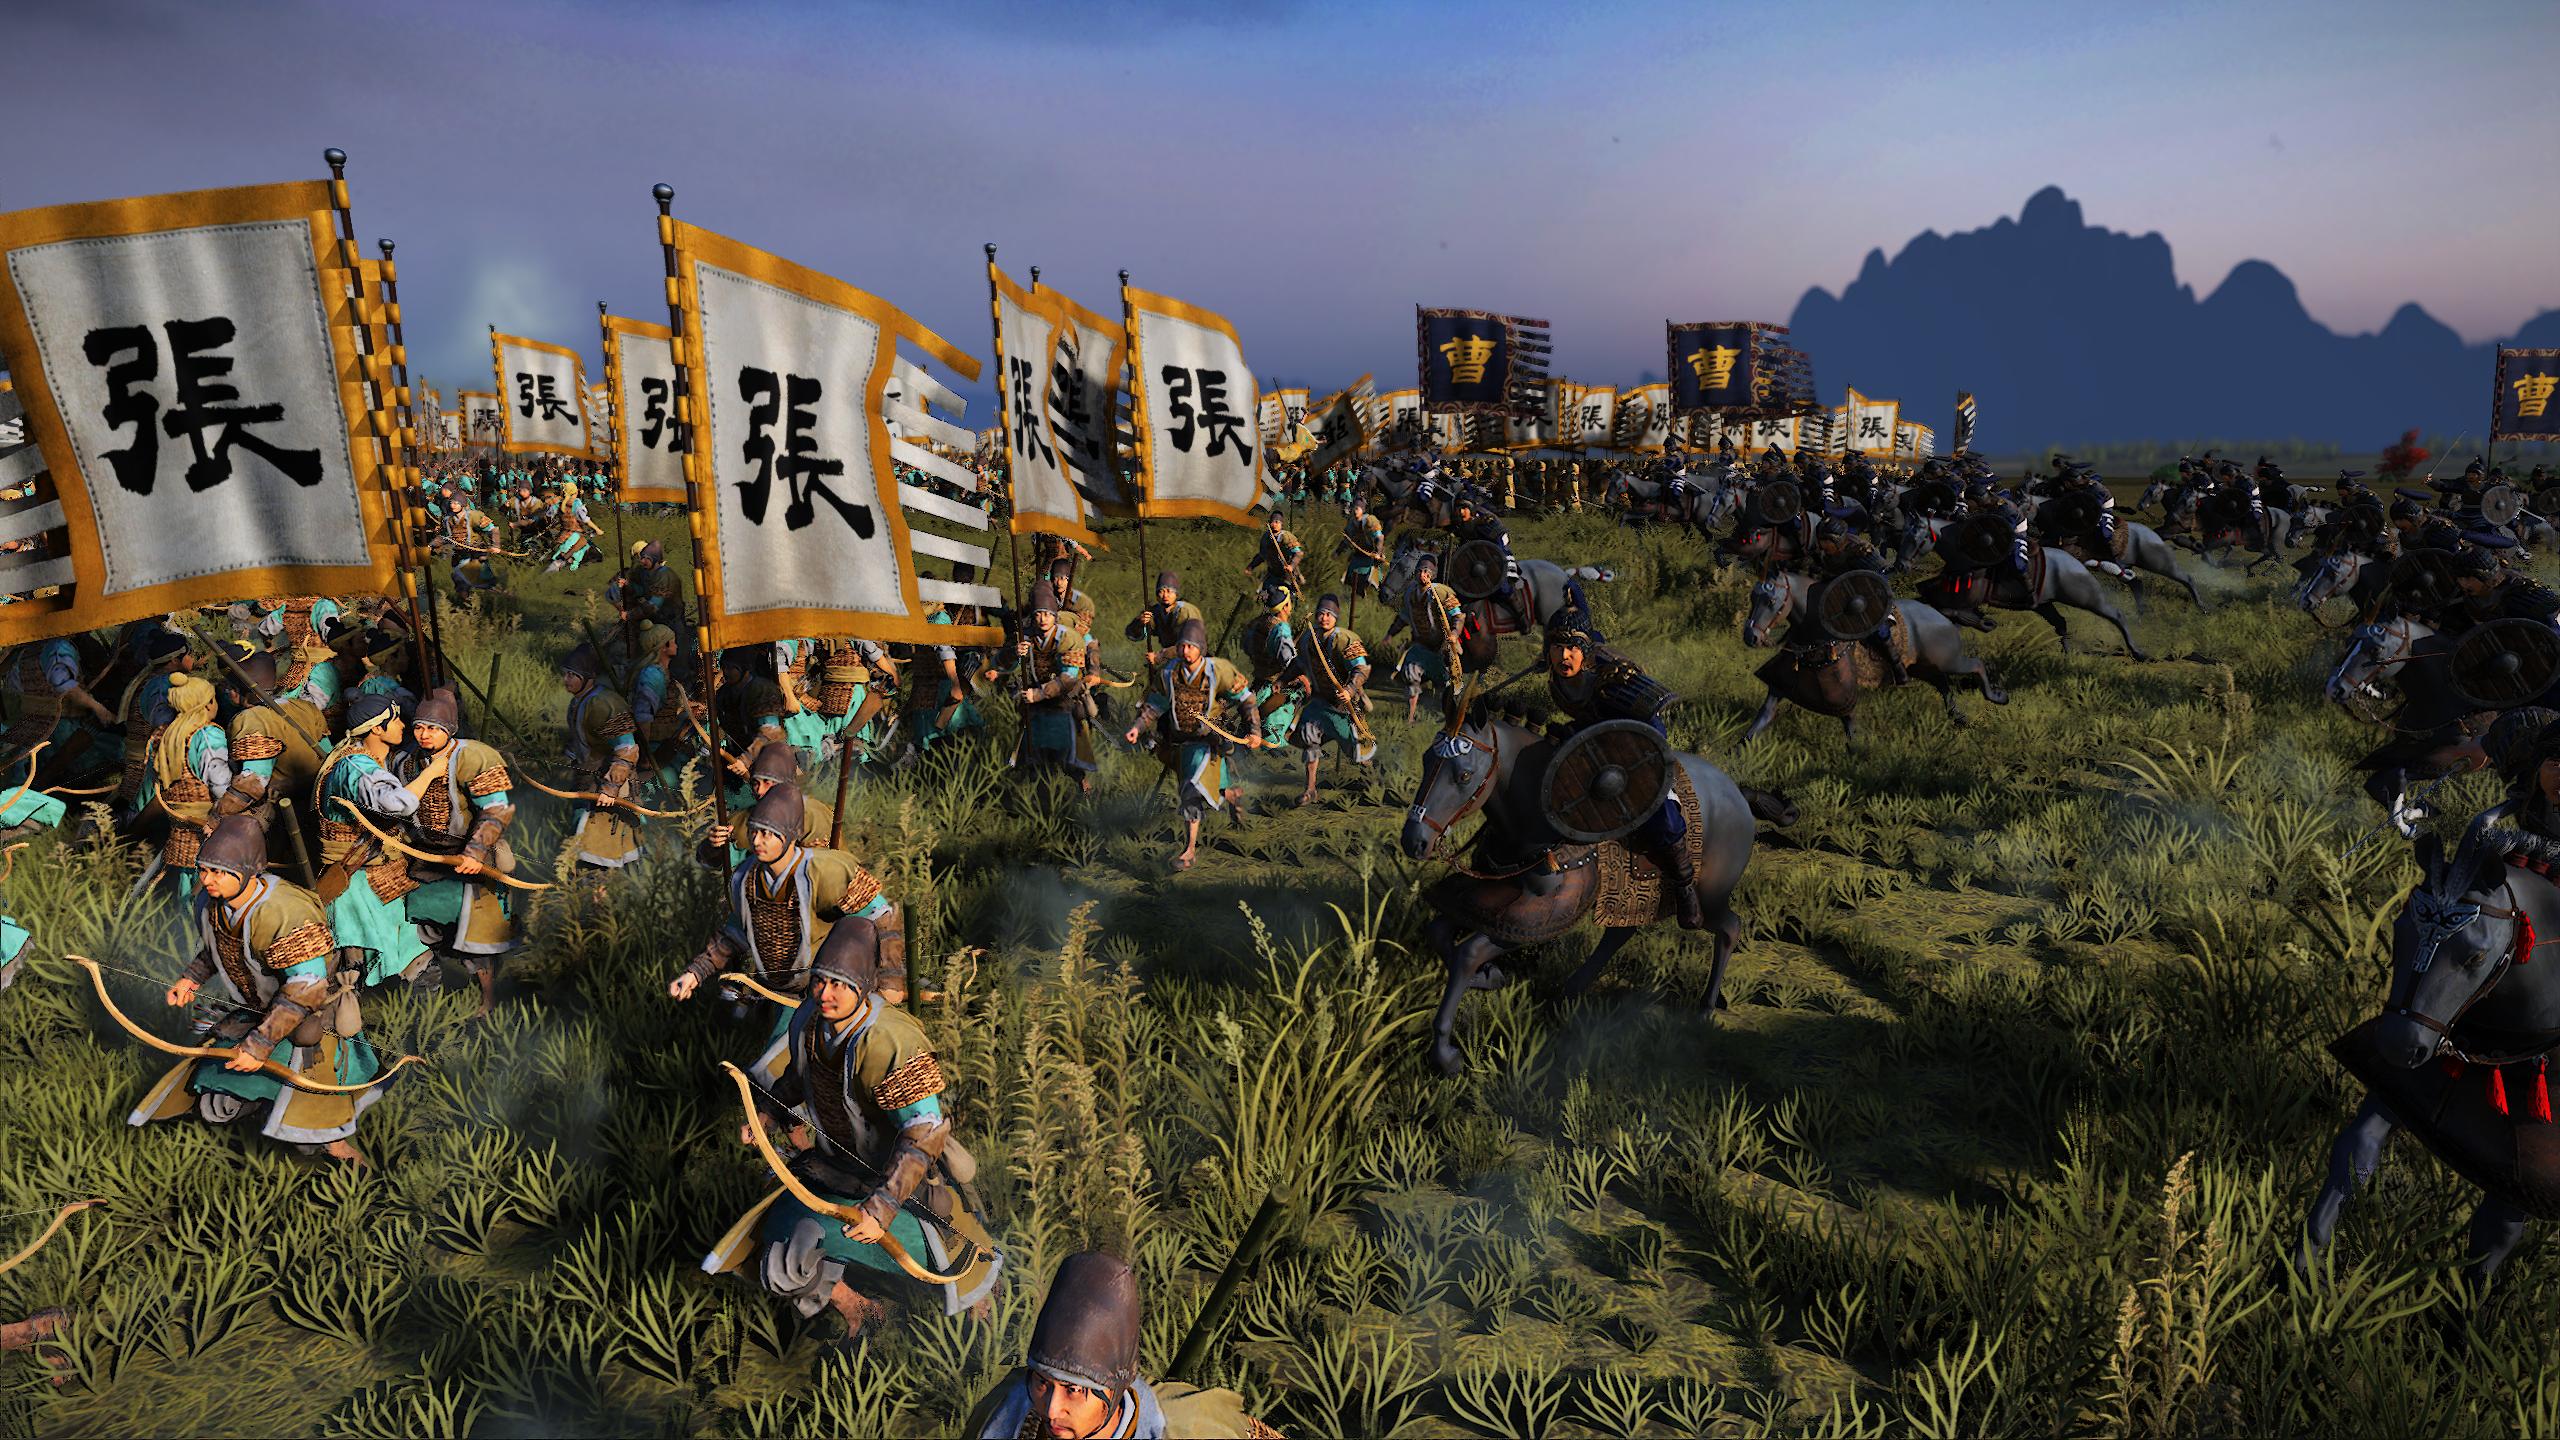 Total War: THREE KINGDOMS Bloodline dynasty - Chapter 2 - Northern Campaign Part 4 